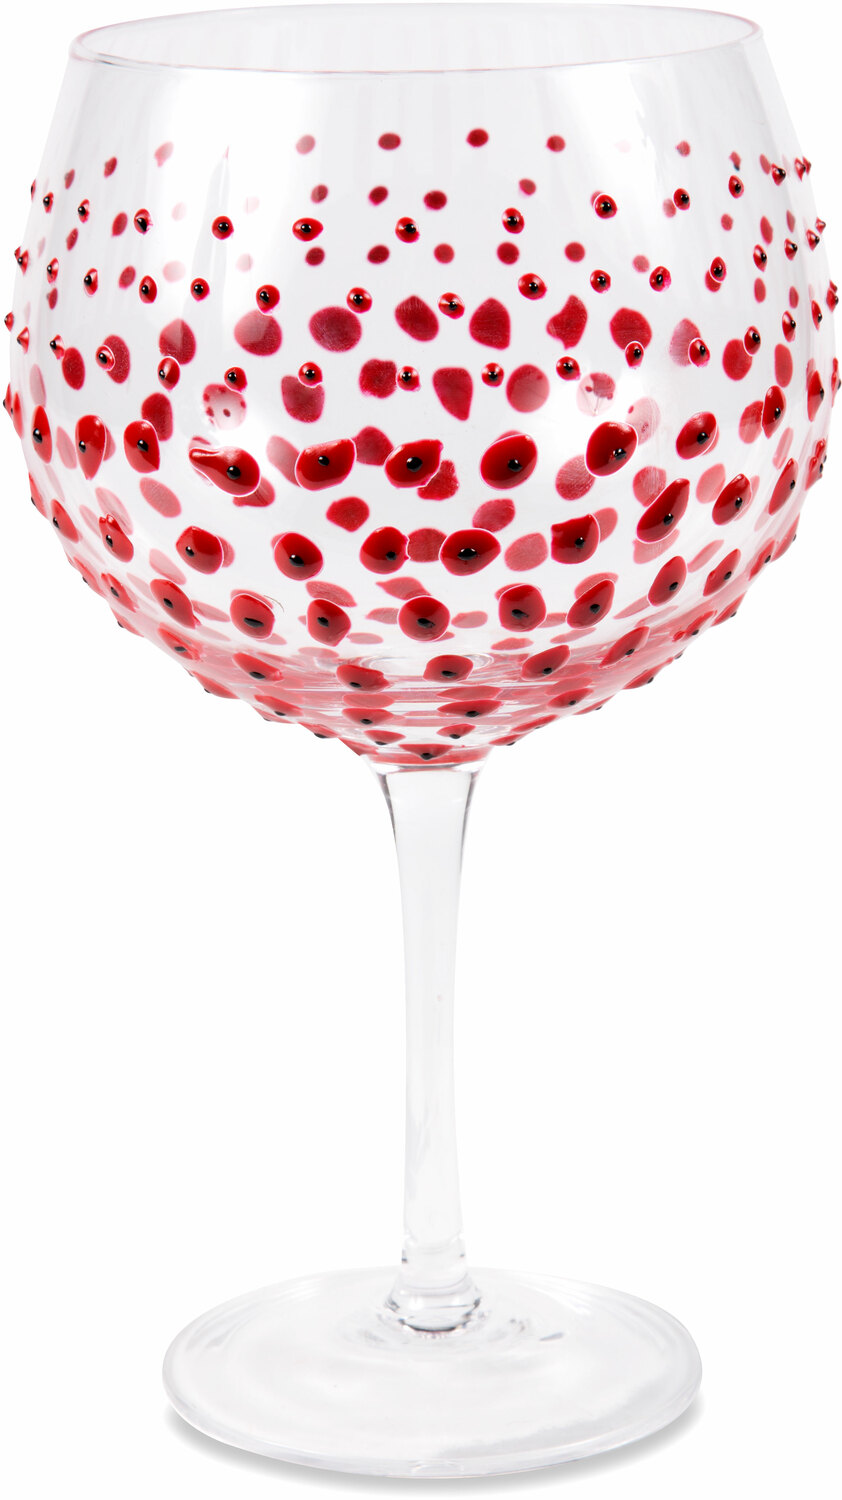 Red Poppies by Sunny by Sue - Red Poppies - 24 oz Hand Decorated Glass